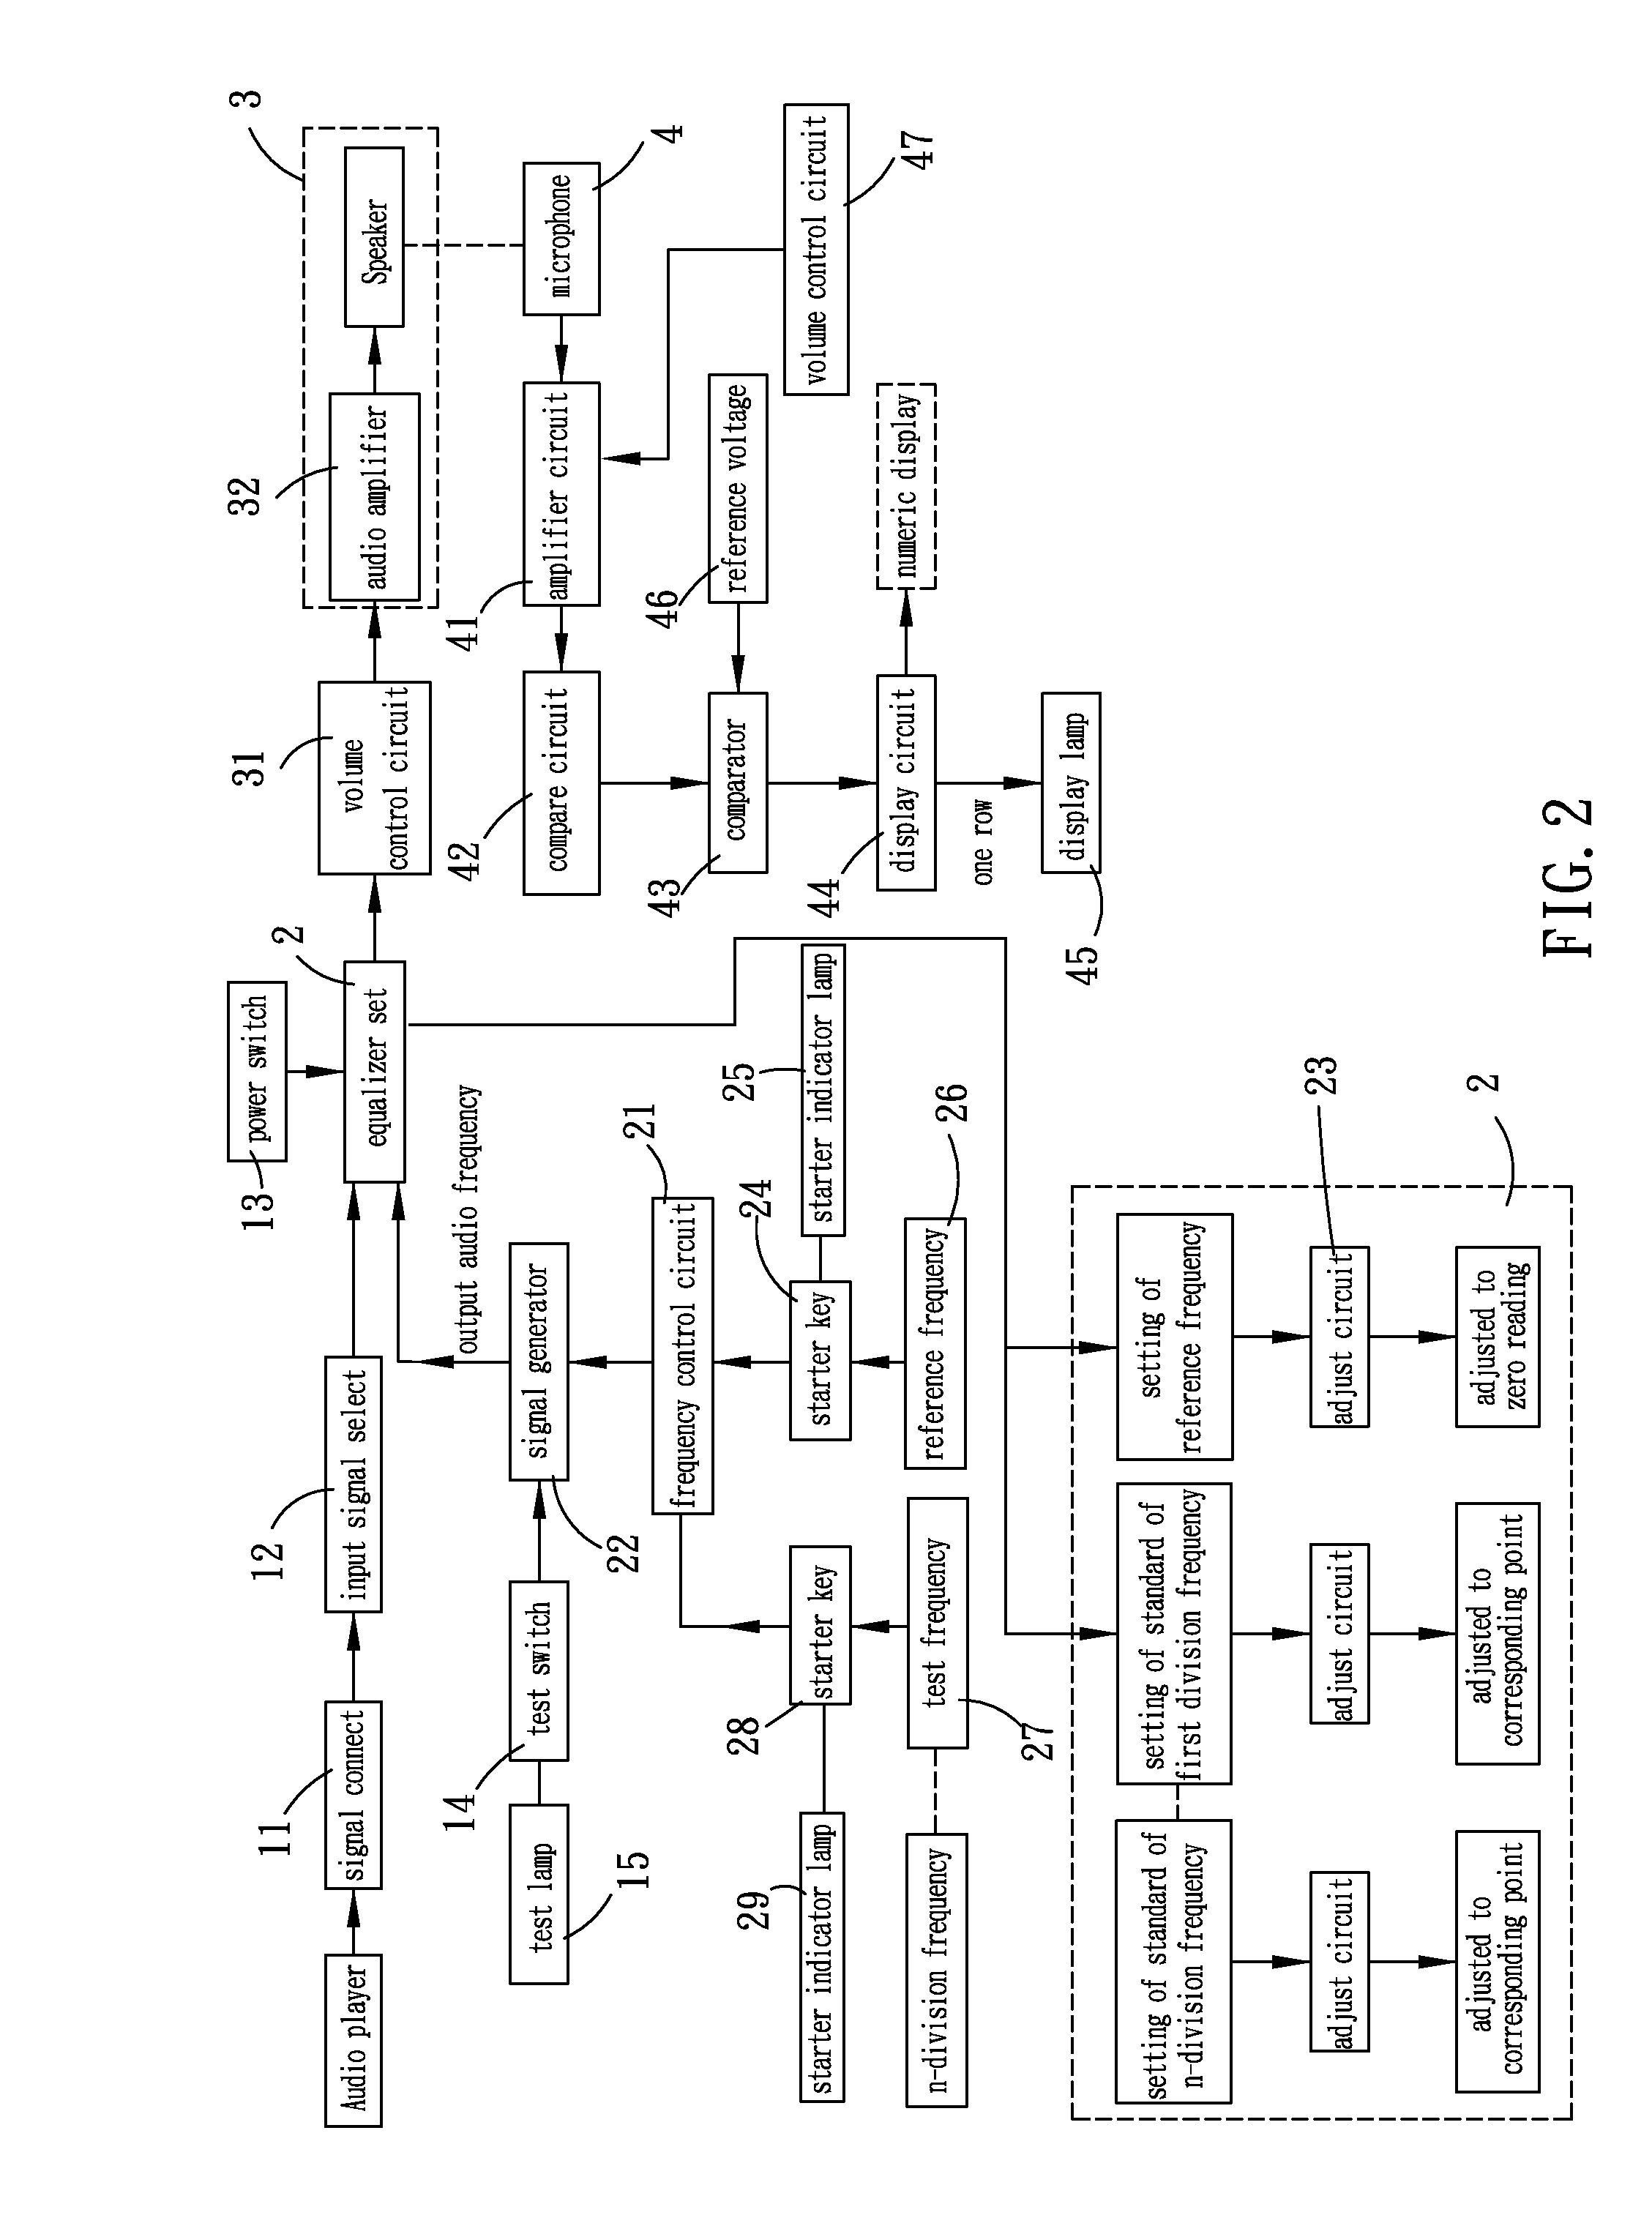 Combination equalizer and calibrator circuit assembly for audio system